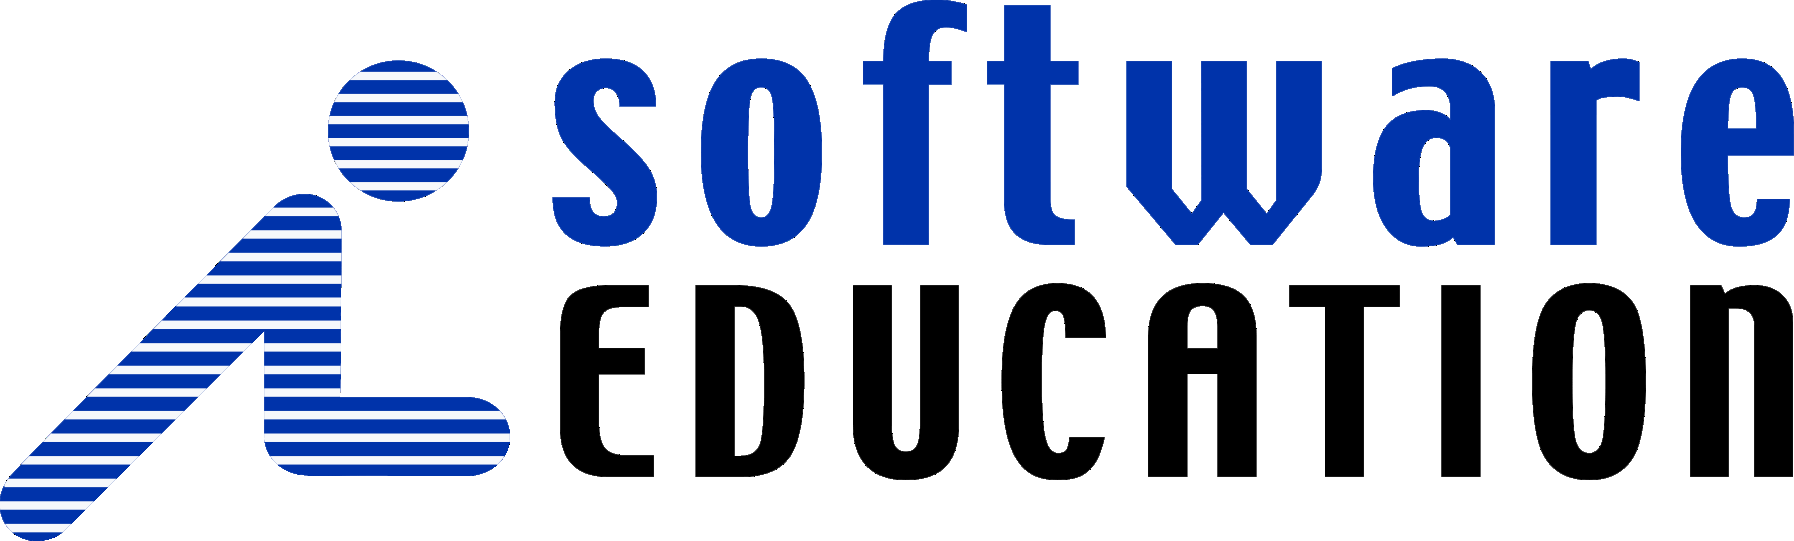 Software Education